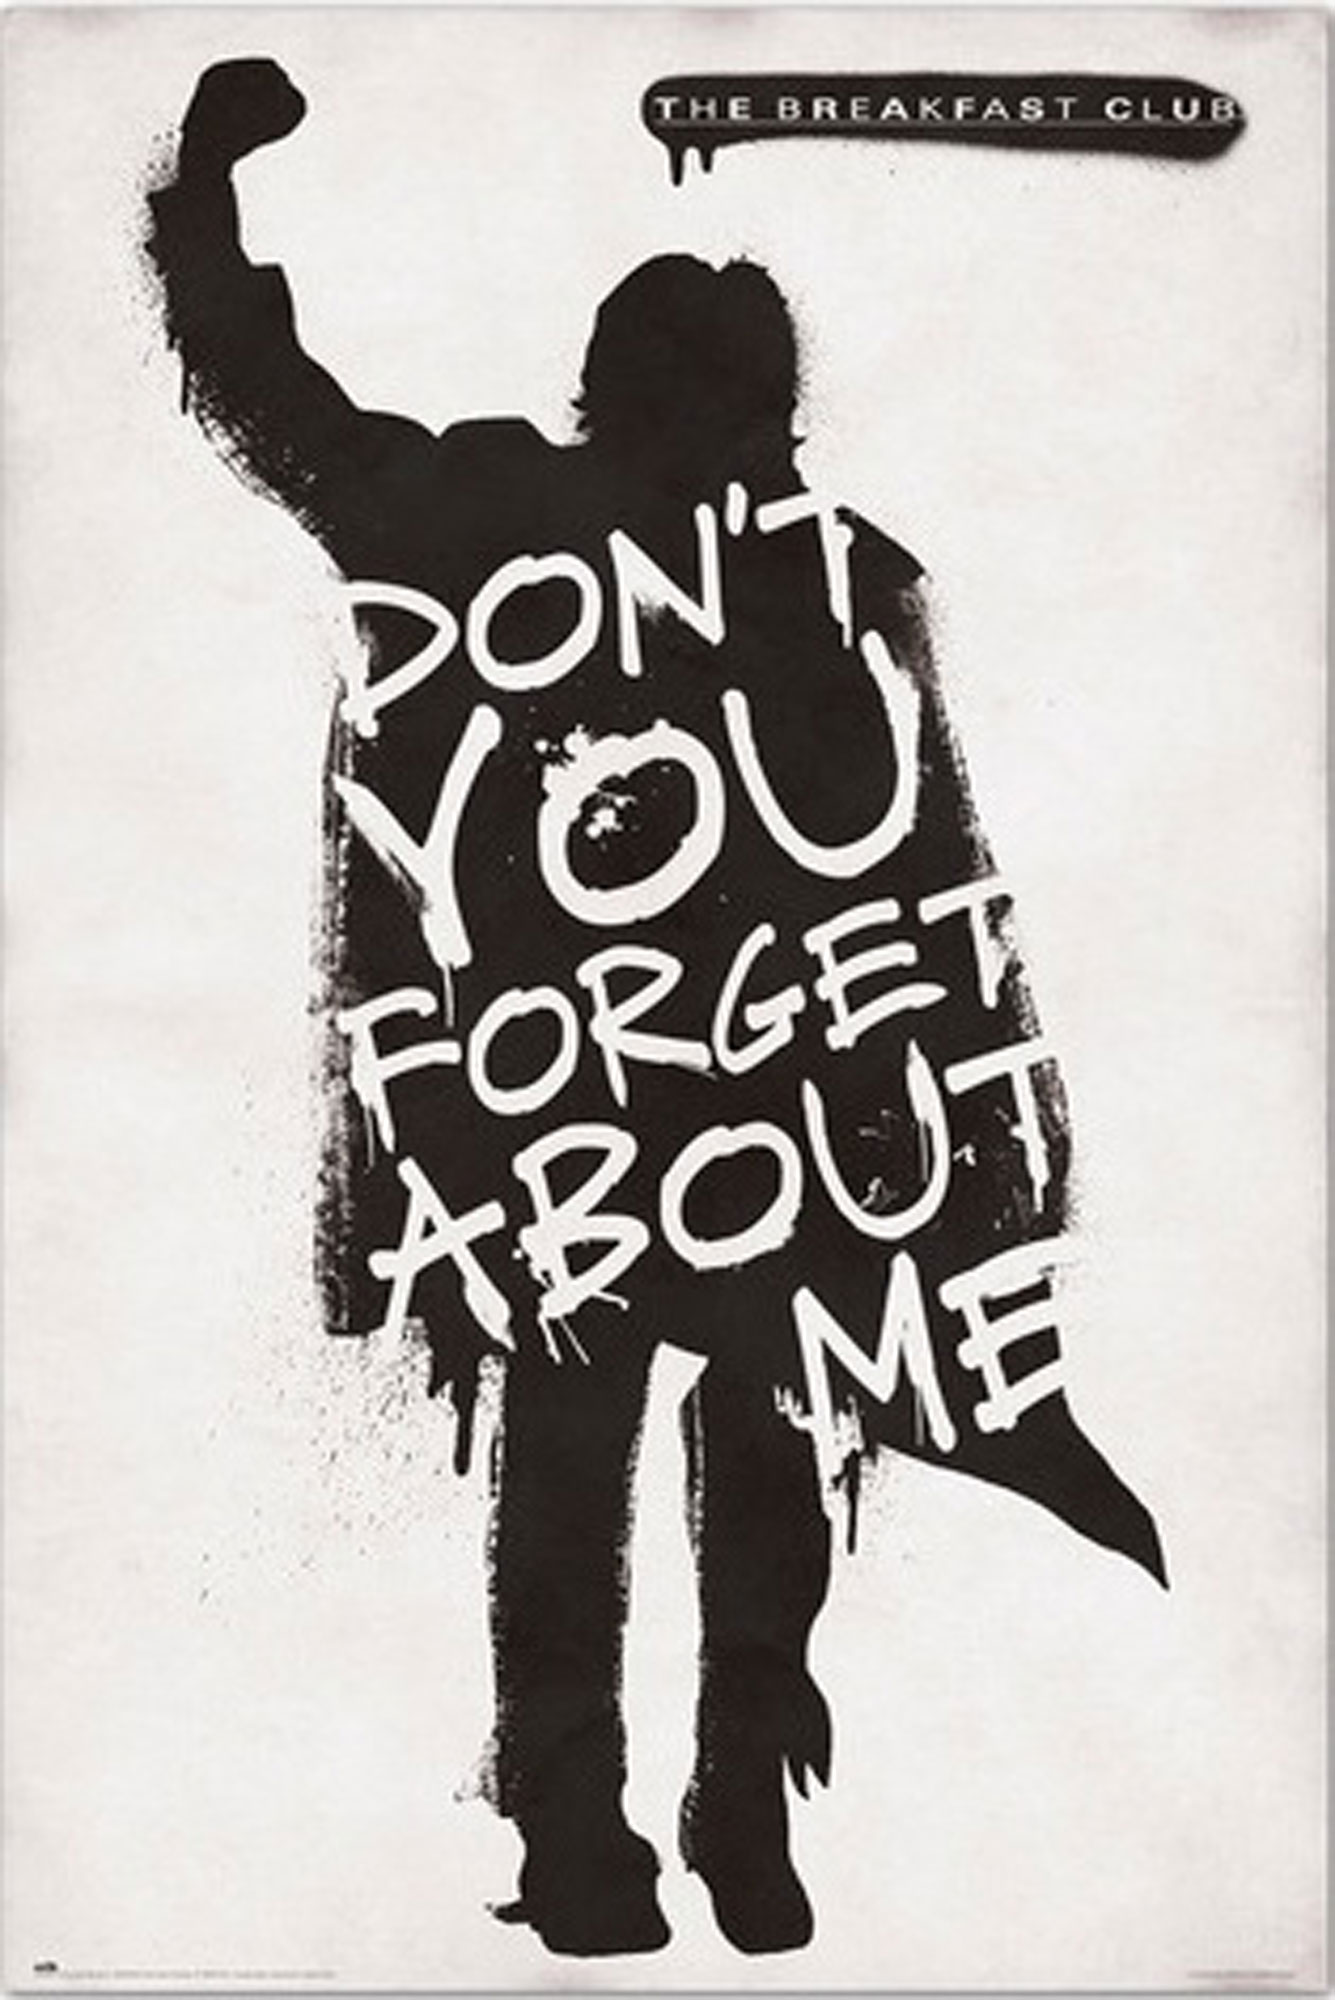 Breakfast Club, The - Don´t forget you me about